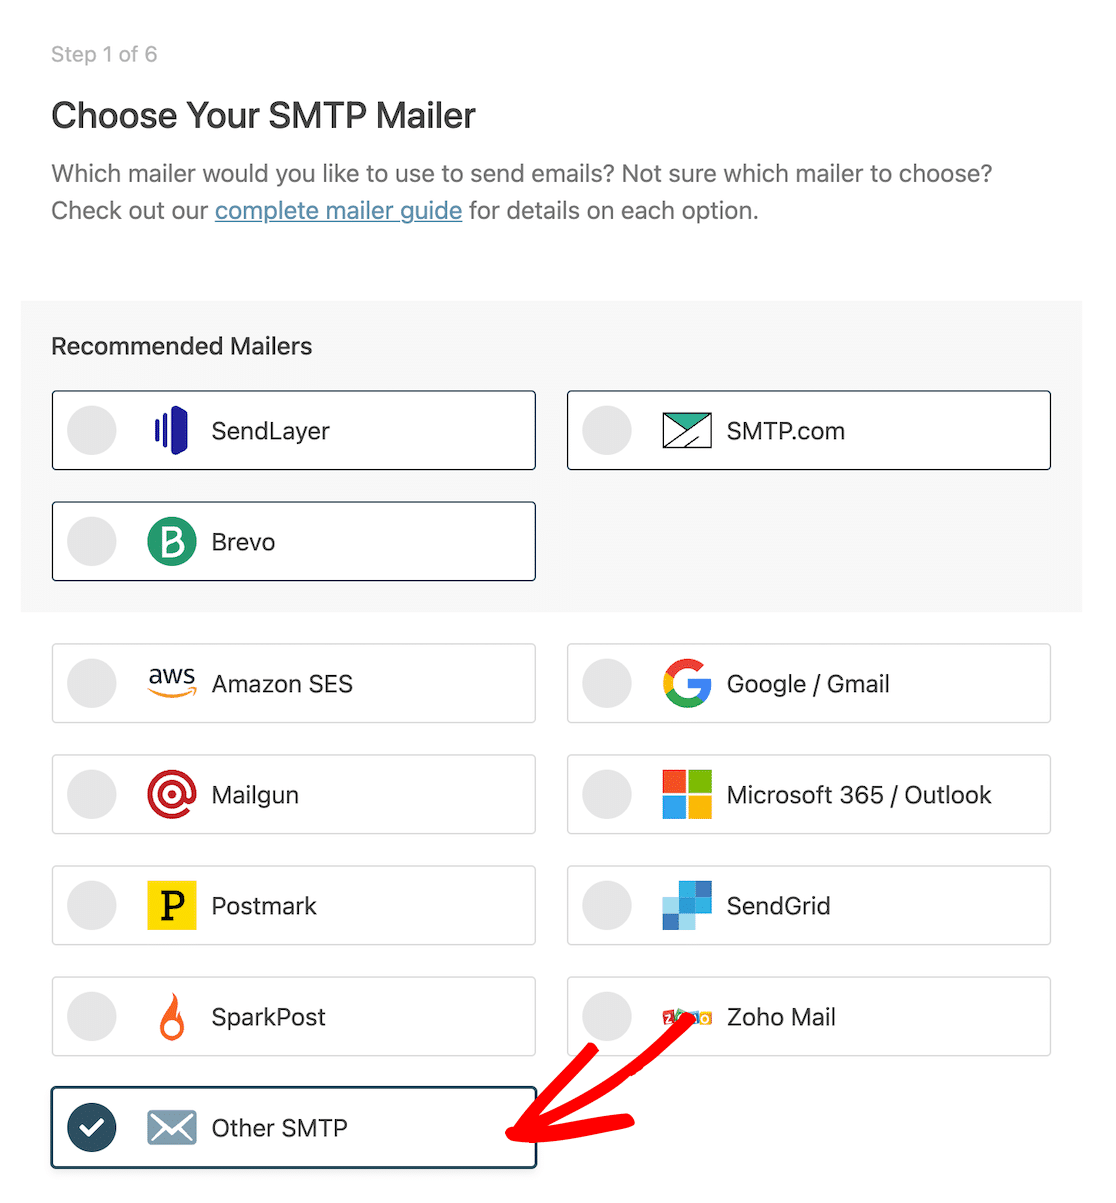 Choose Other SMTP